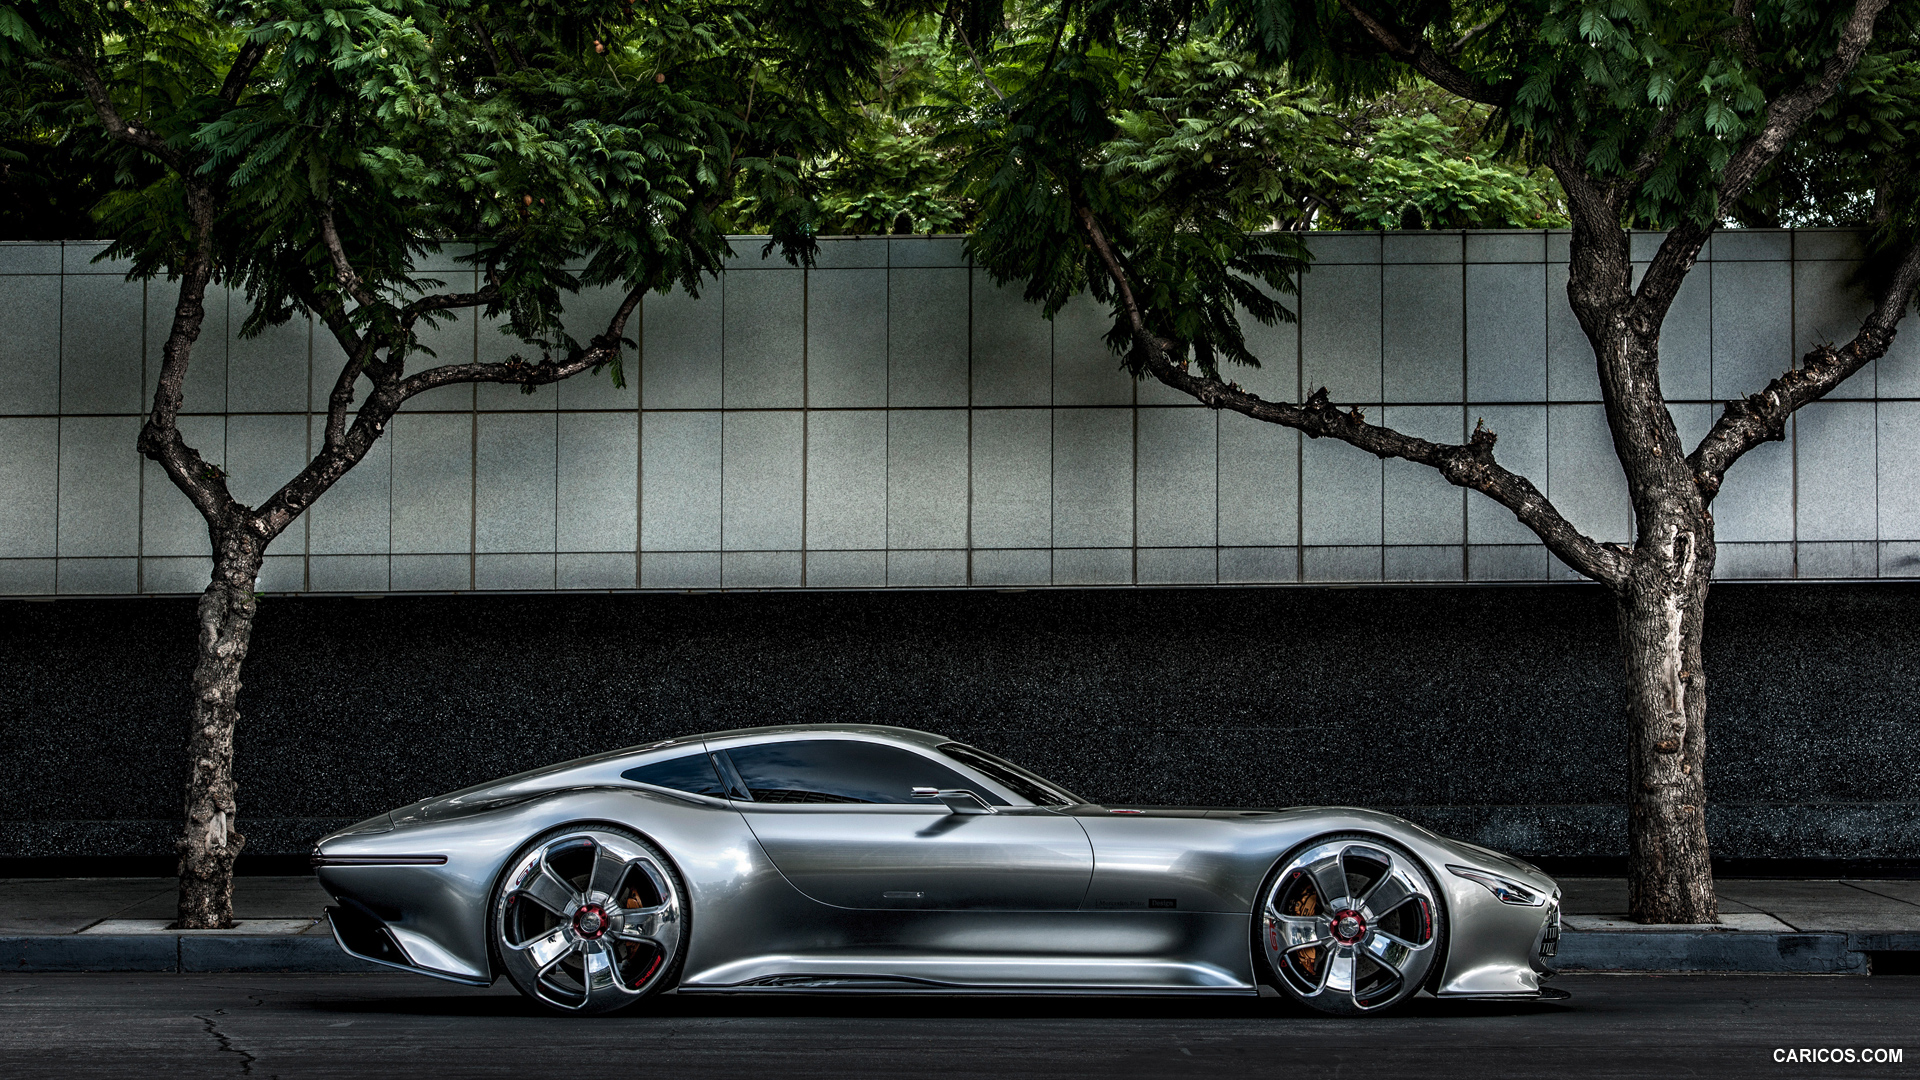 Mercedes-Benz AMG Vision Gran Turismo Concept (2013)  - Side, #3 of 25